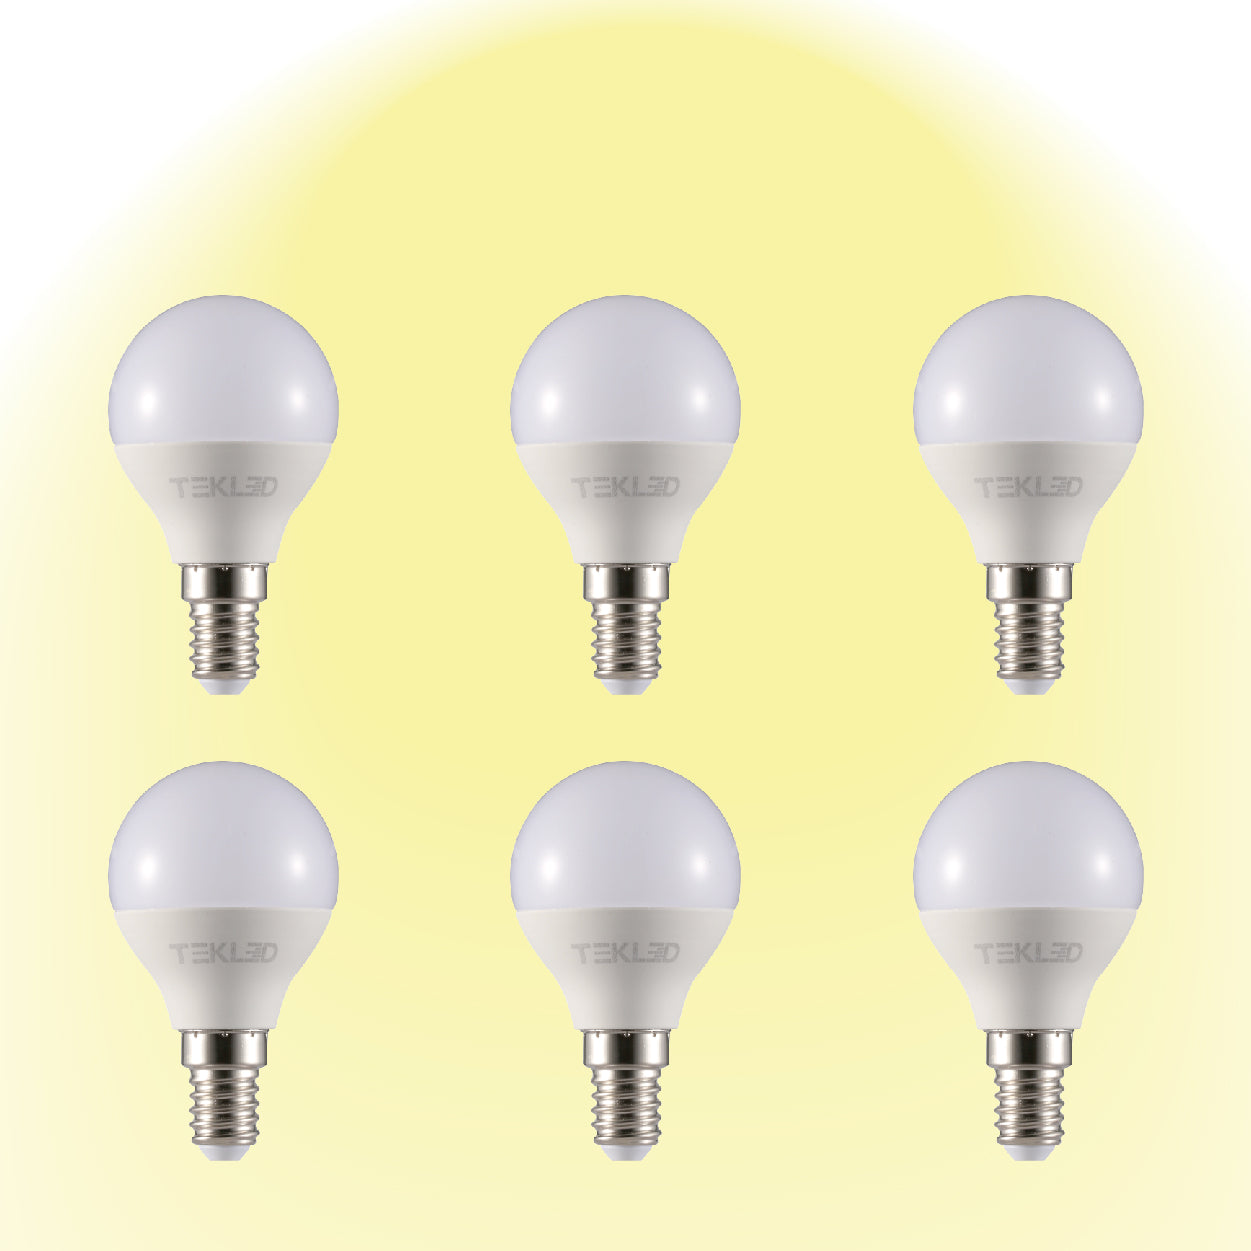 3000K warm white Canes LED Golf Ball Bulb P45 Dimmable E14 Small Edison Screw 6W 6 pack